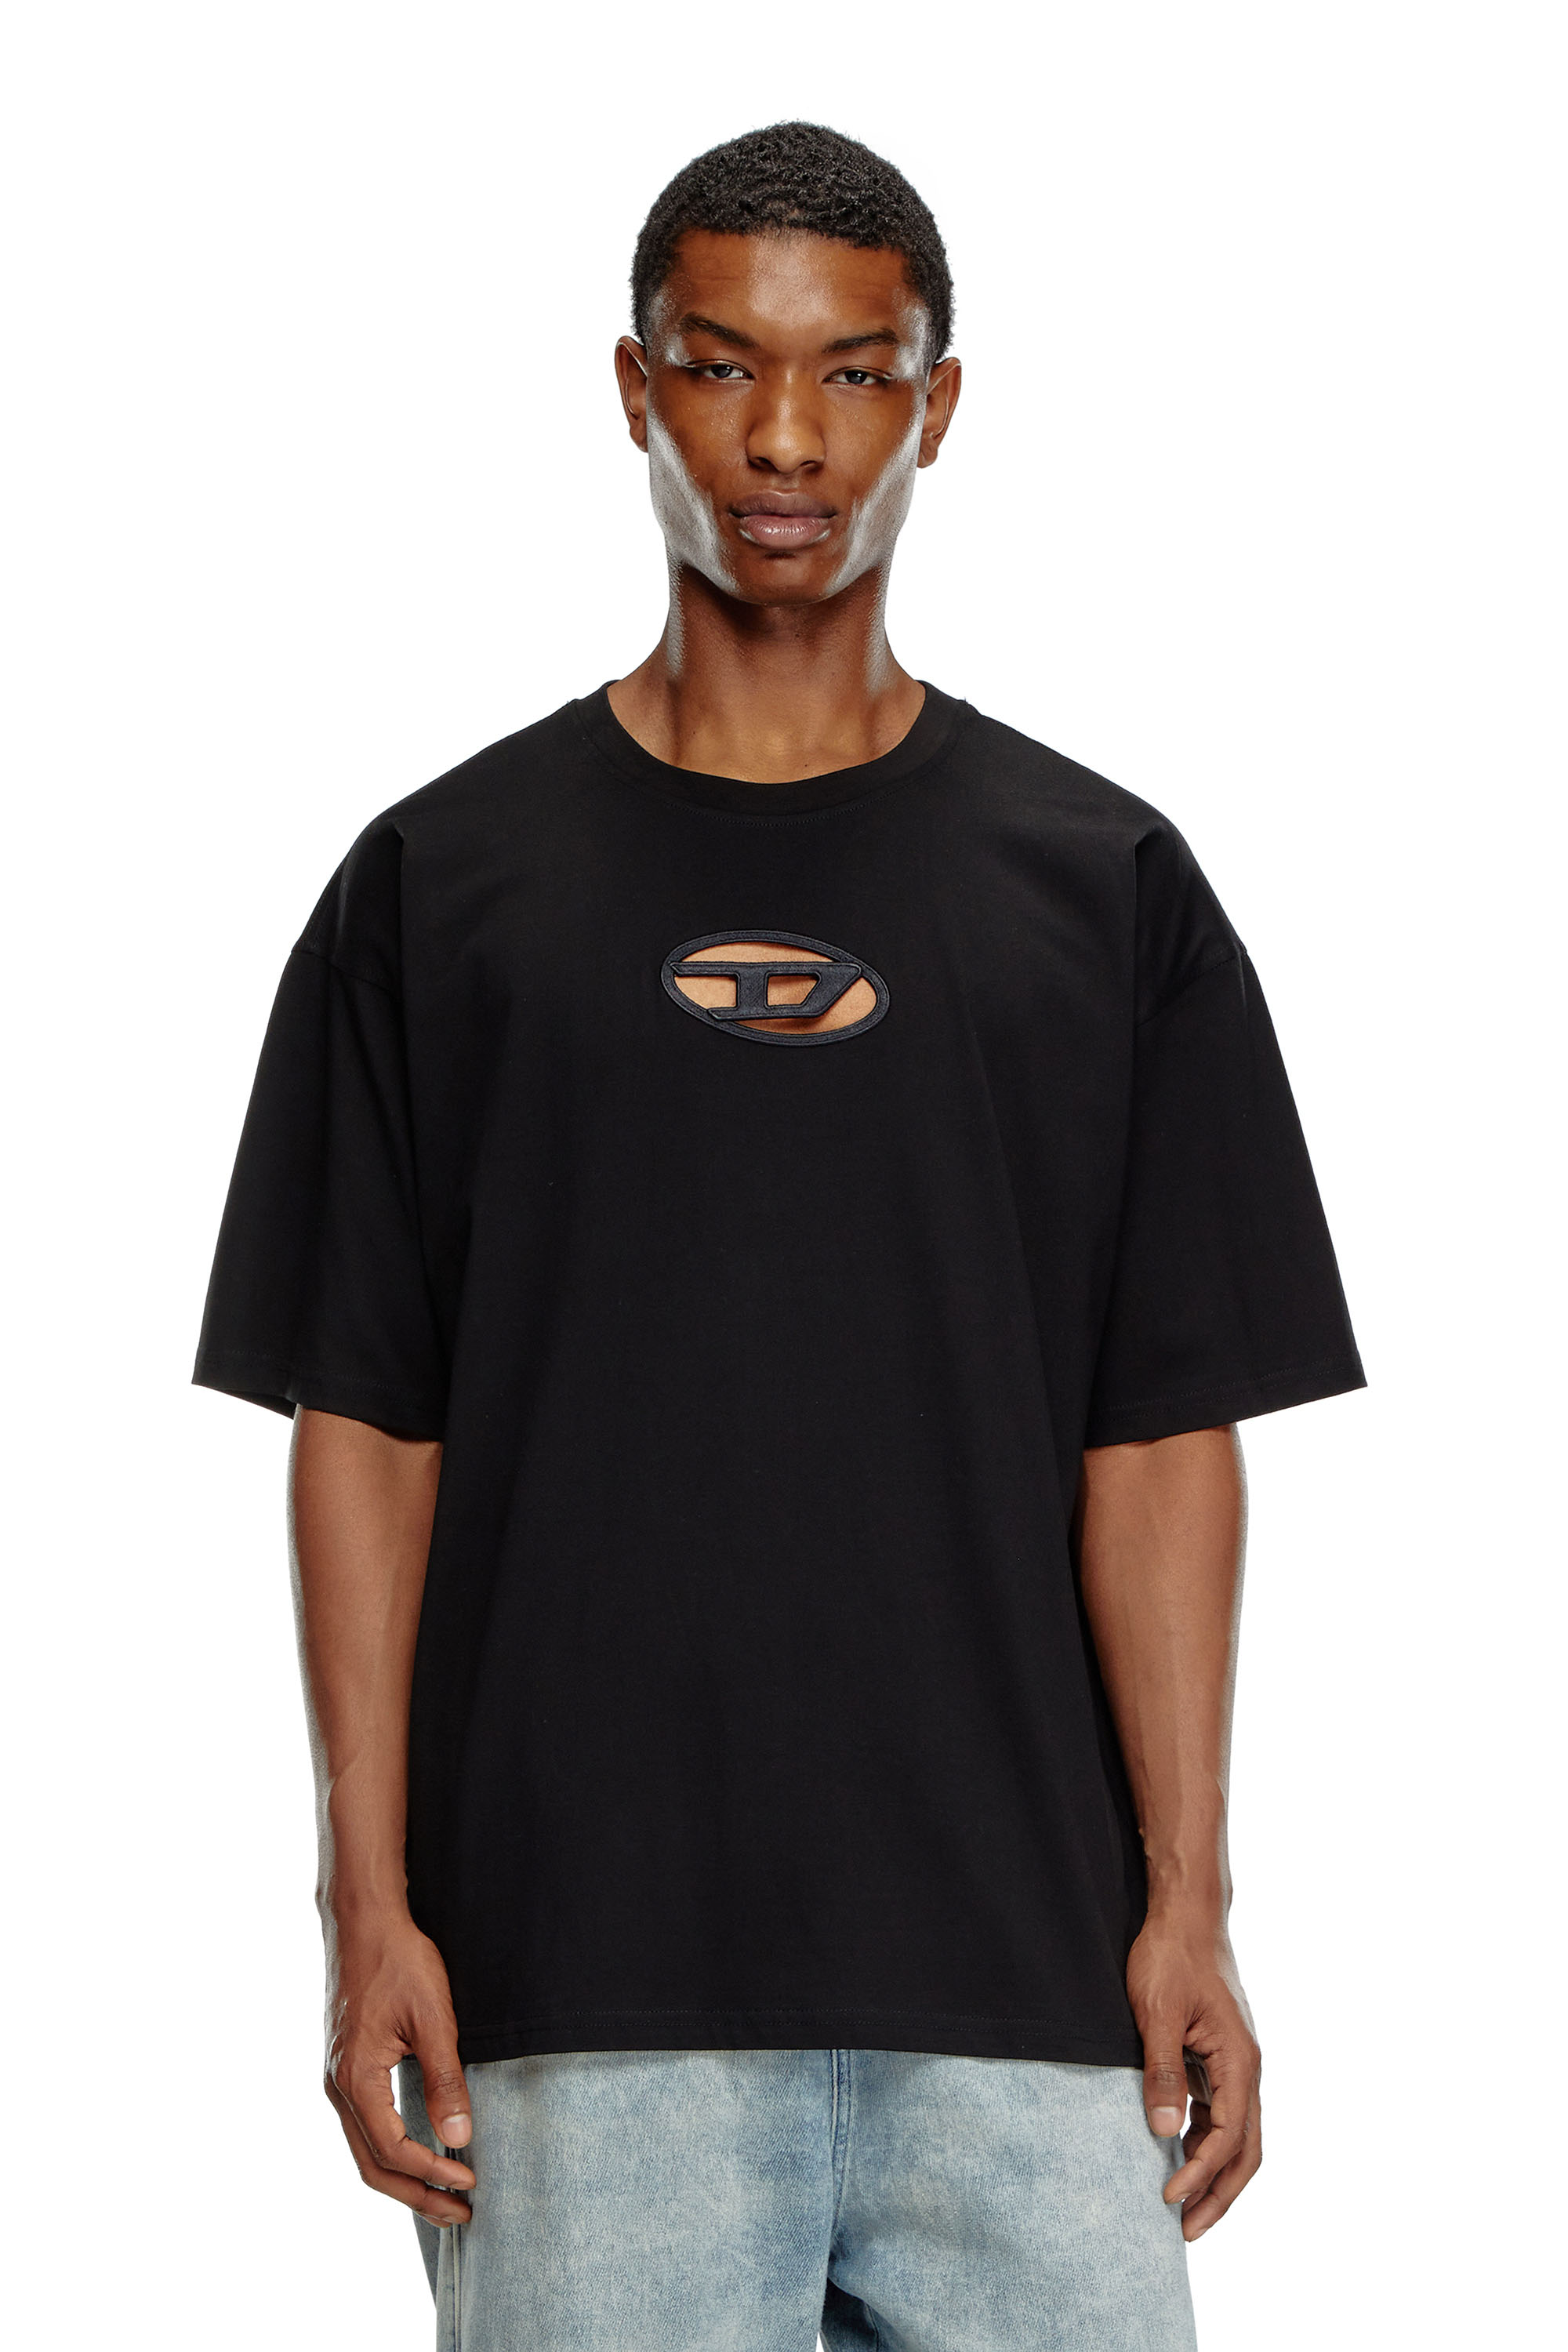 Diesel T-shirt With Embroidered Oval D In Black